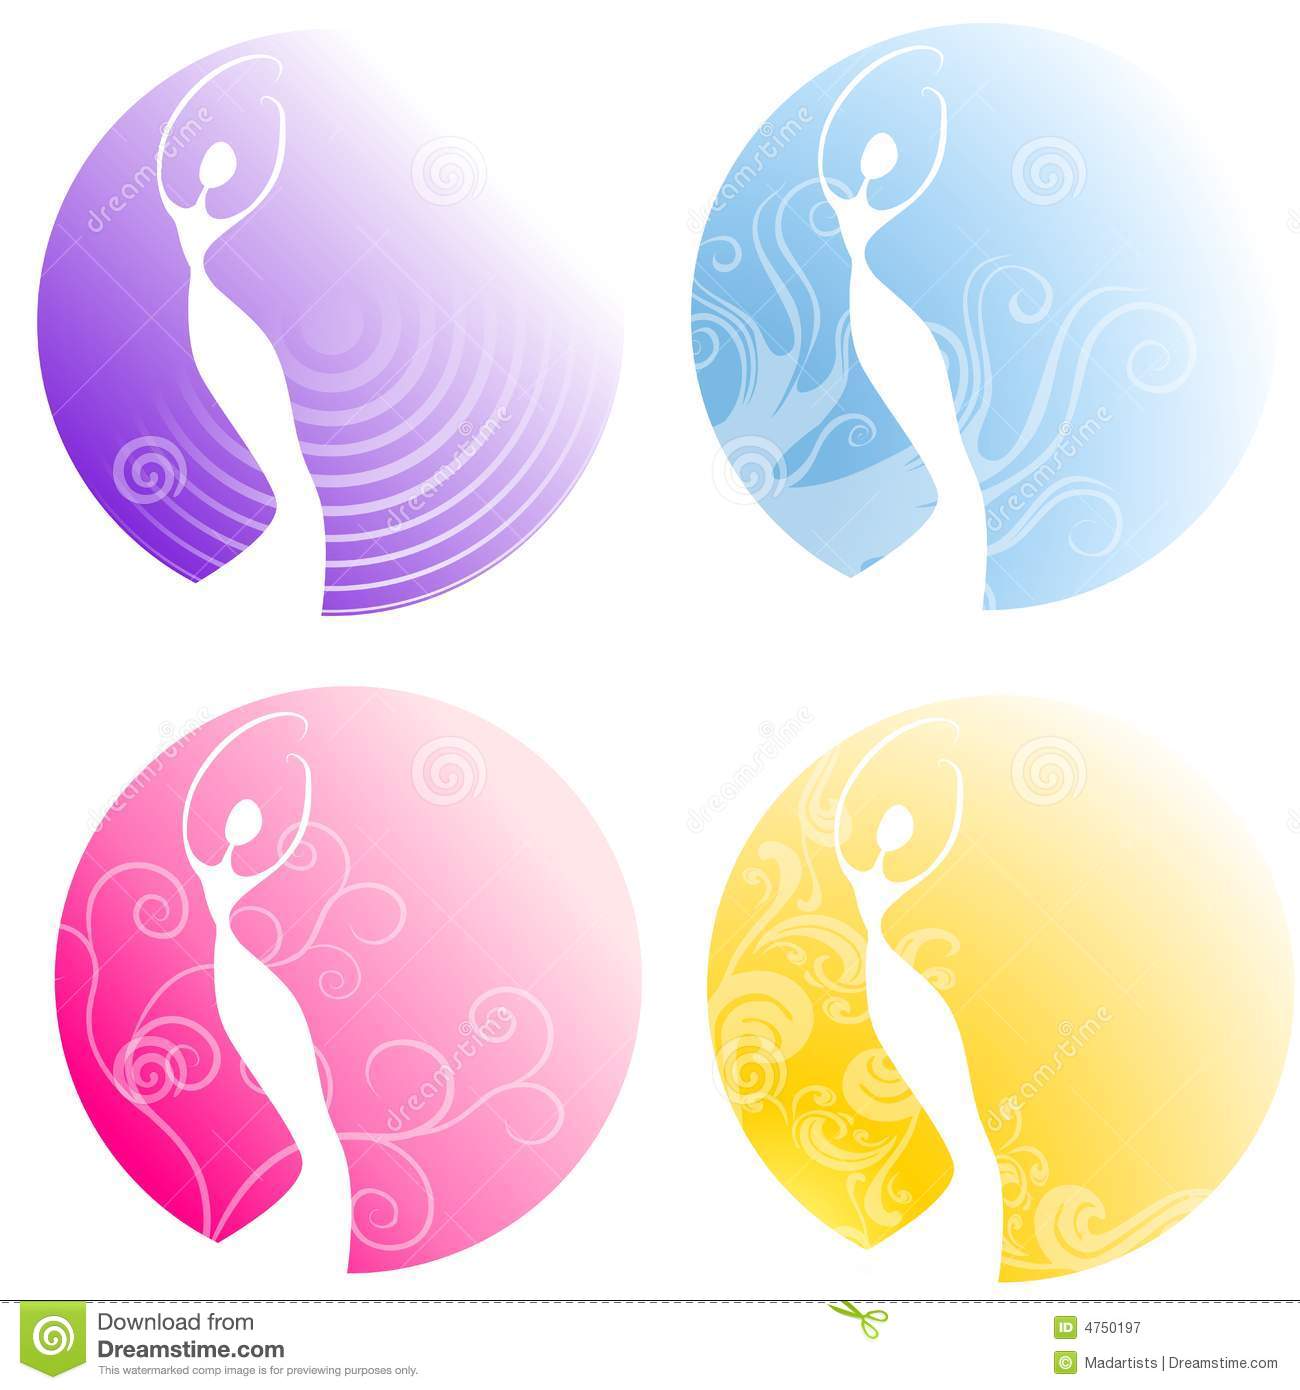 An Illustration Featuring Your Choice Of 4 Female Silhouette Logos In